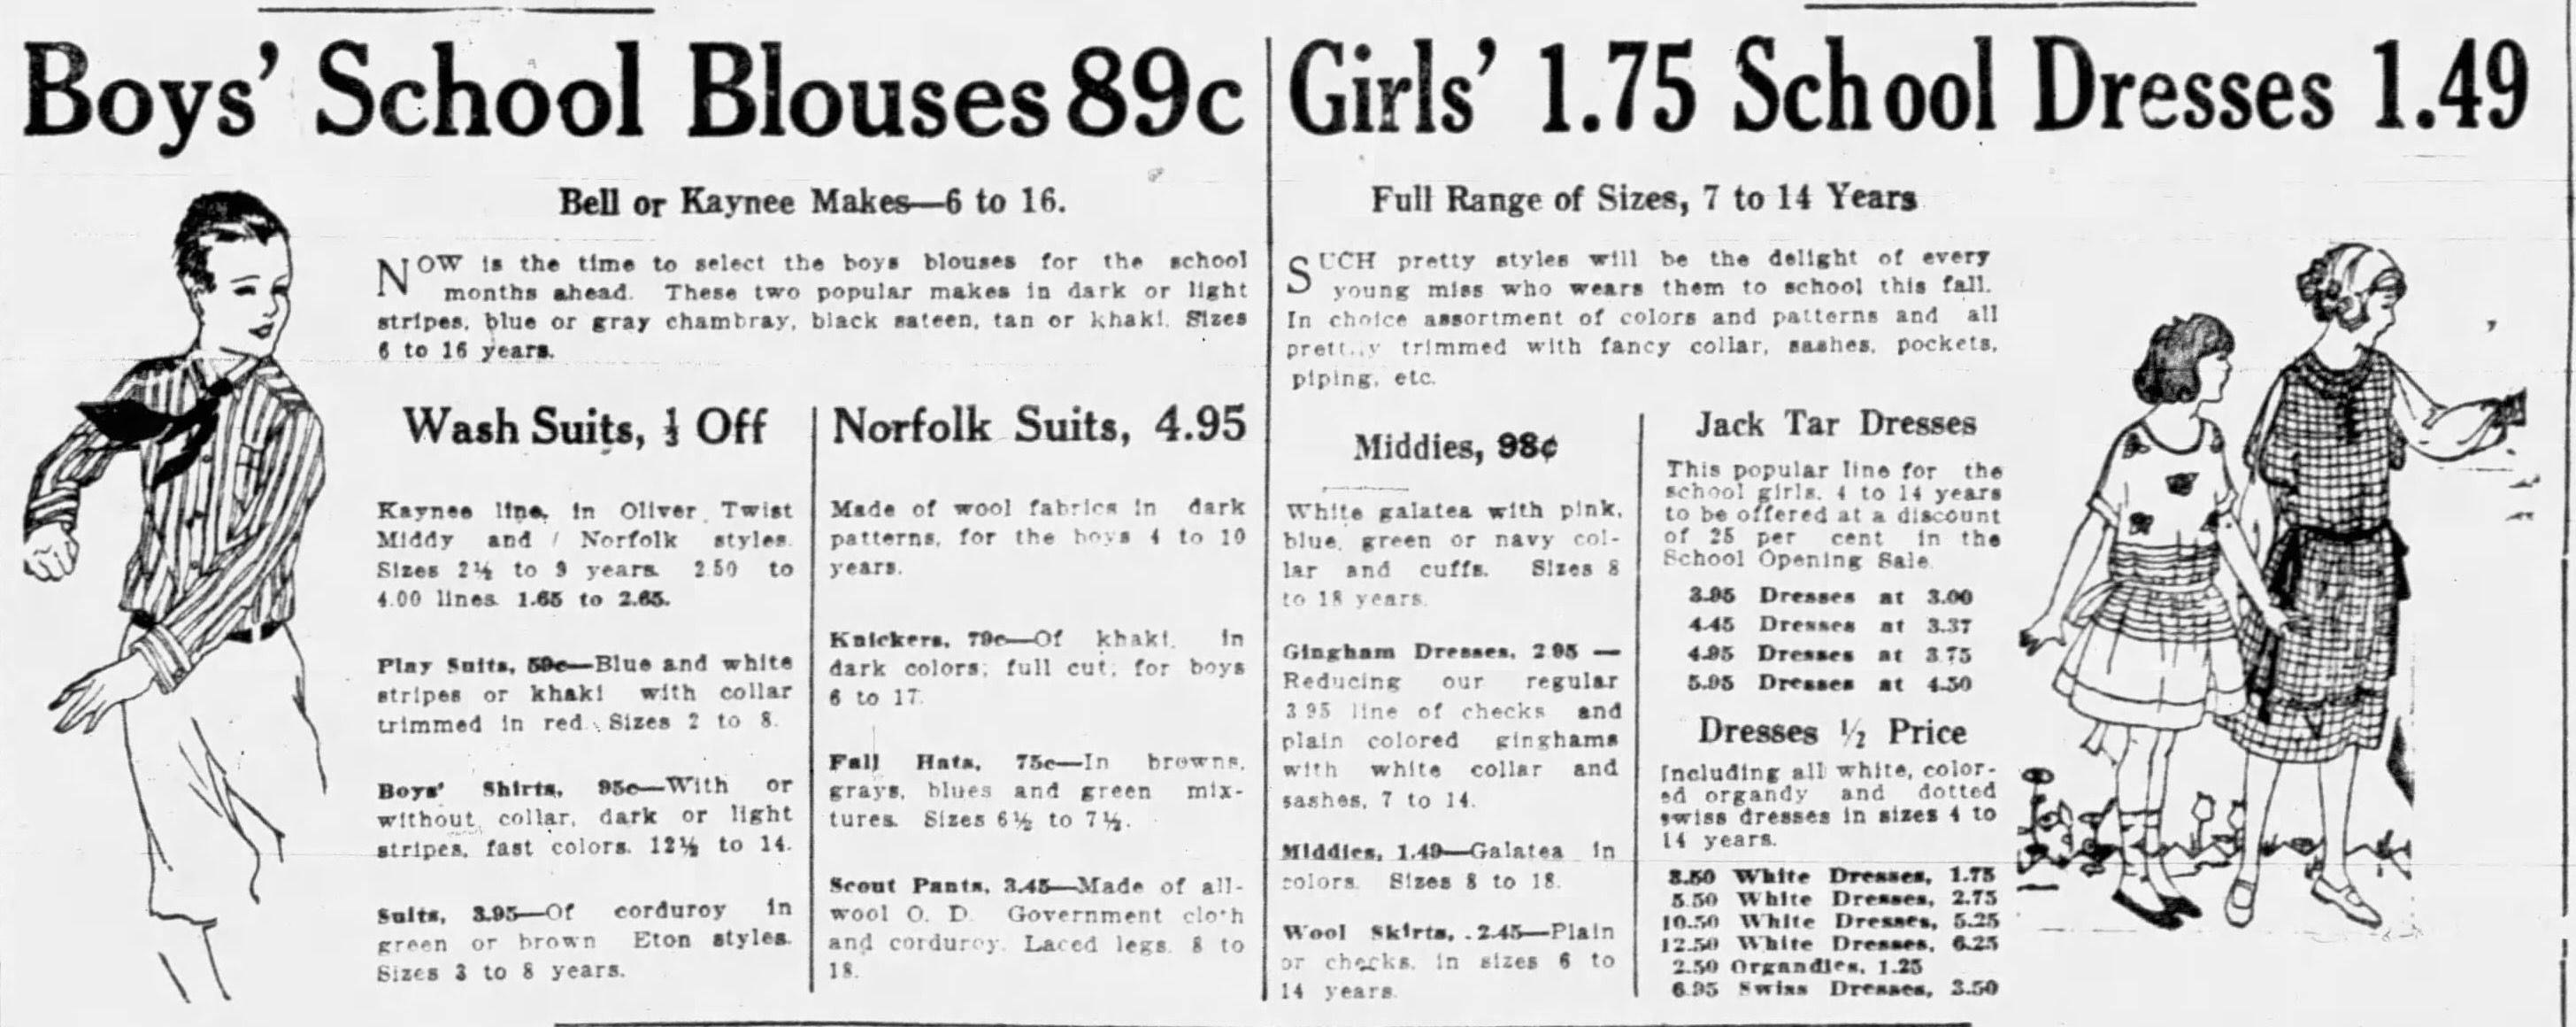 In 1922, back-to-school advertisements for children's clothing advertised suits and dresses.